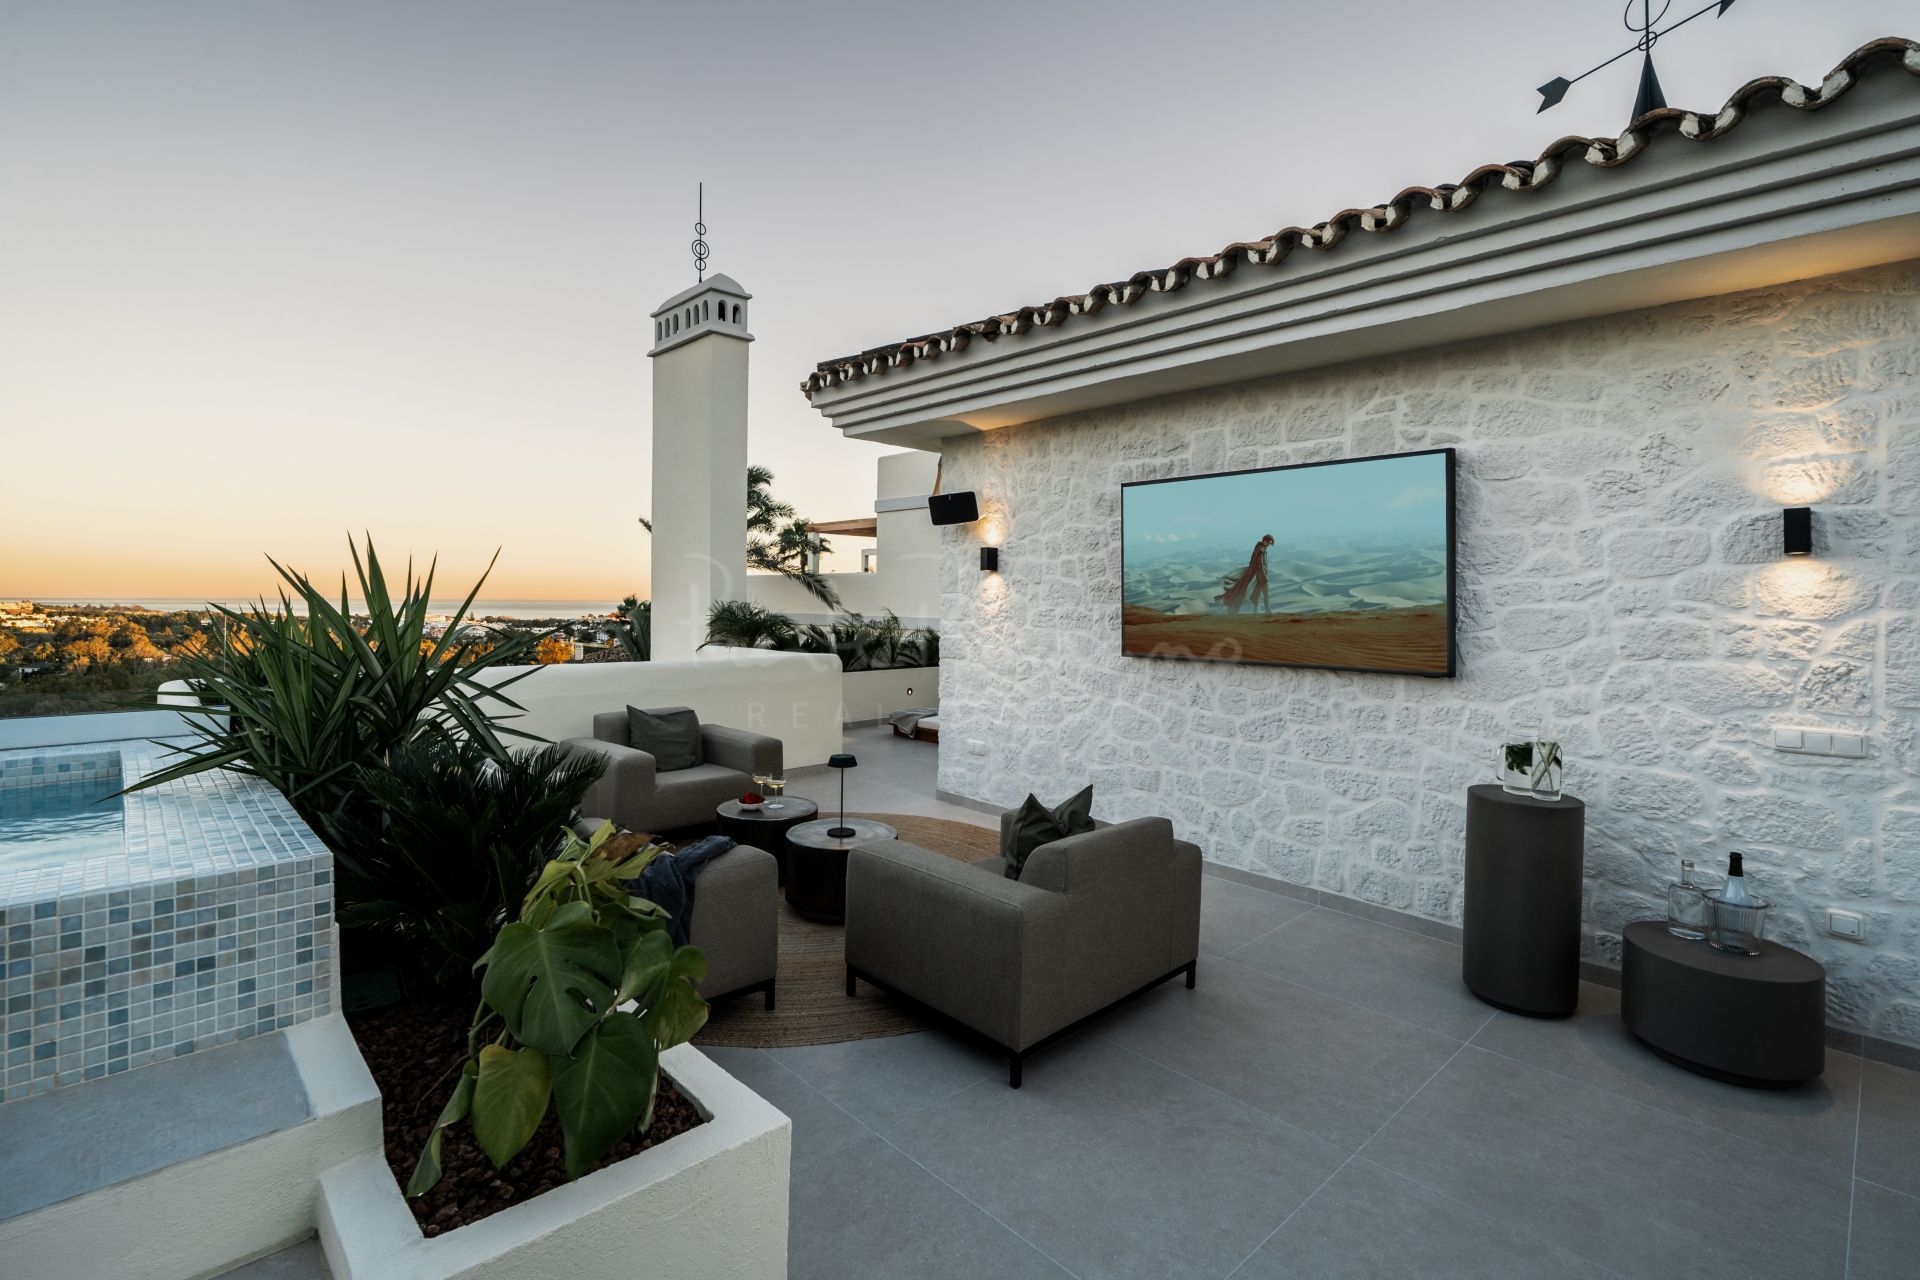 Penthouse in Palacetes Los Belvederes, Marbella